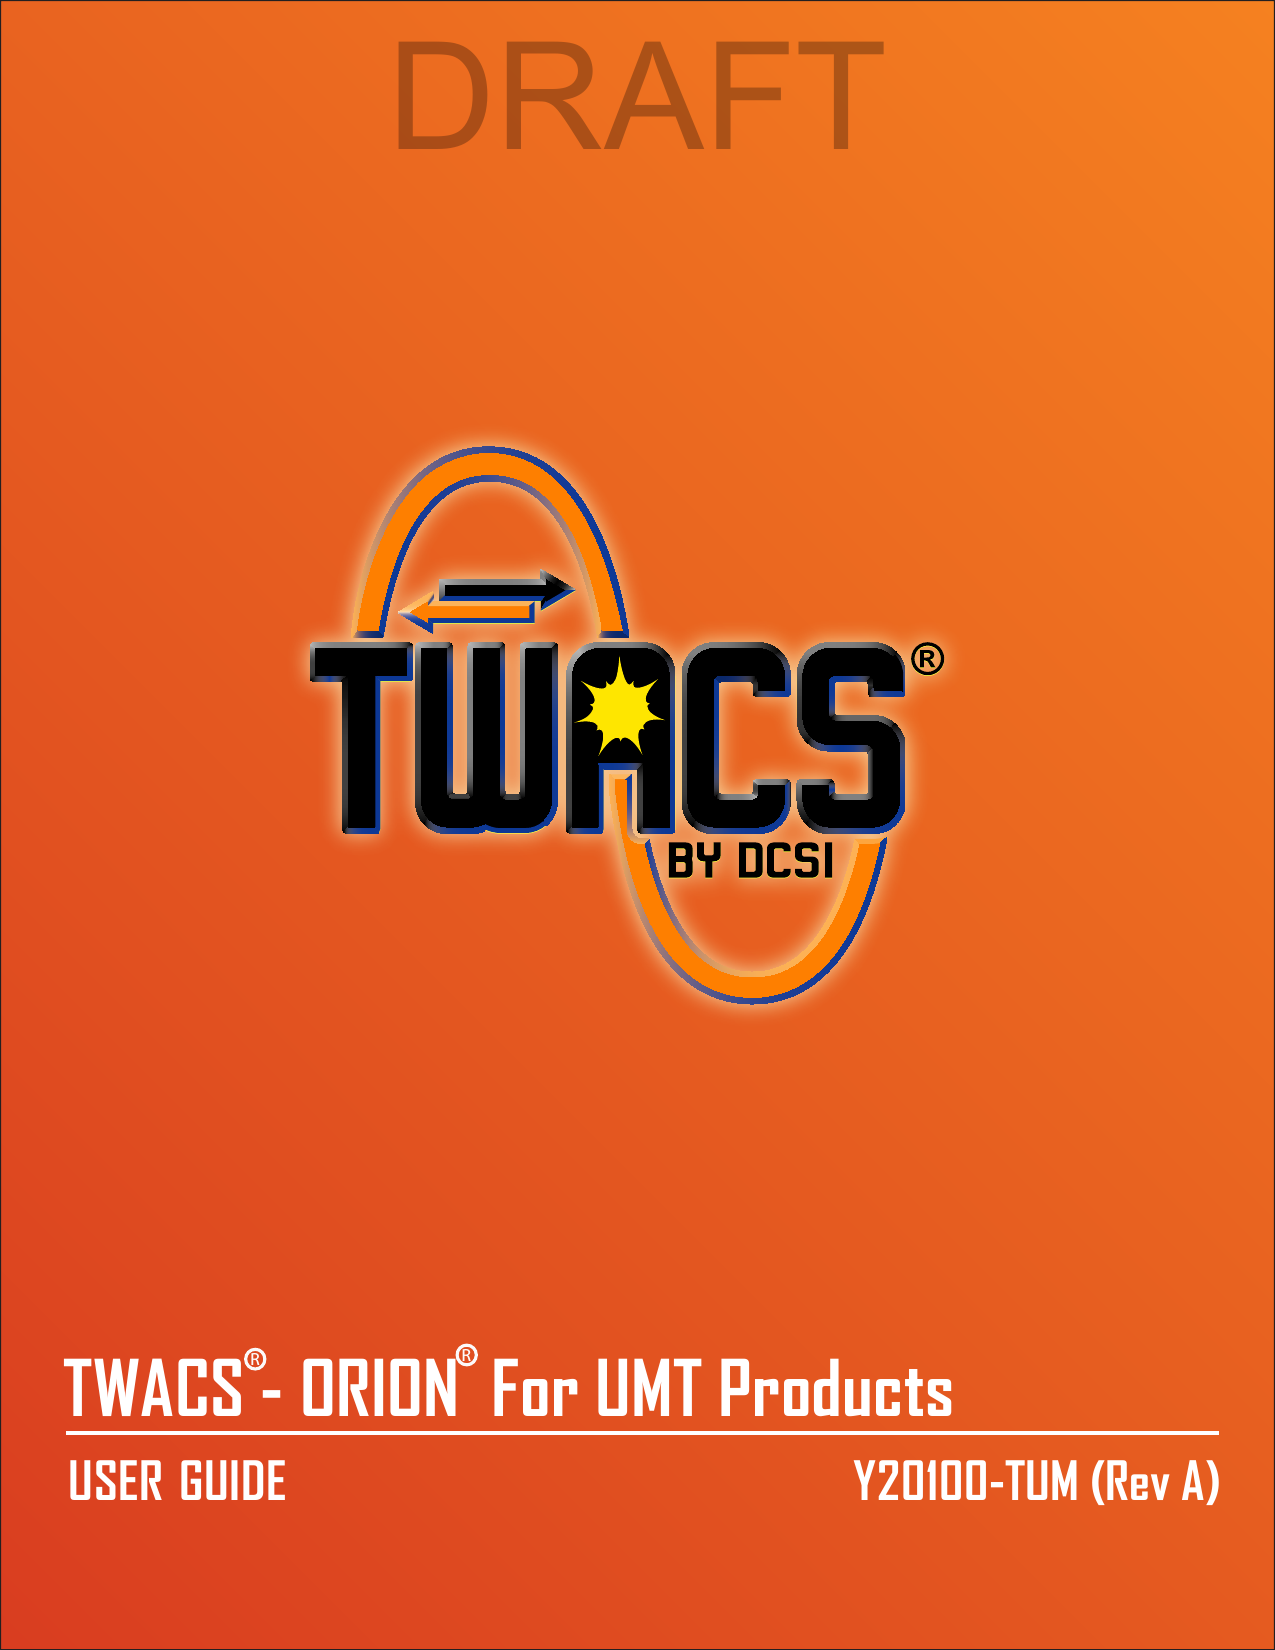 TWACS - ORION     For UMT ProductsUSER GUIDE Y20100-TUM (Rev A)RRDRAFT